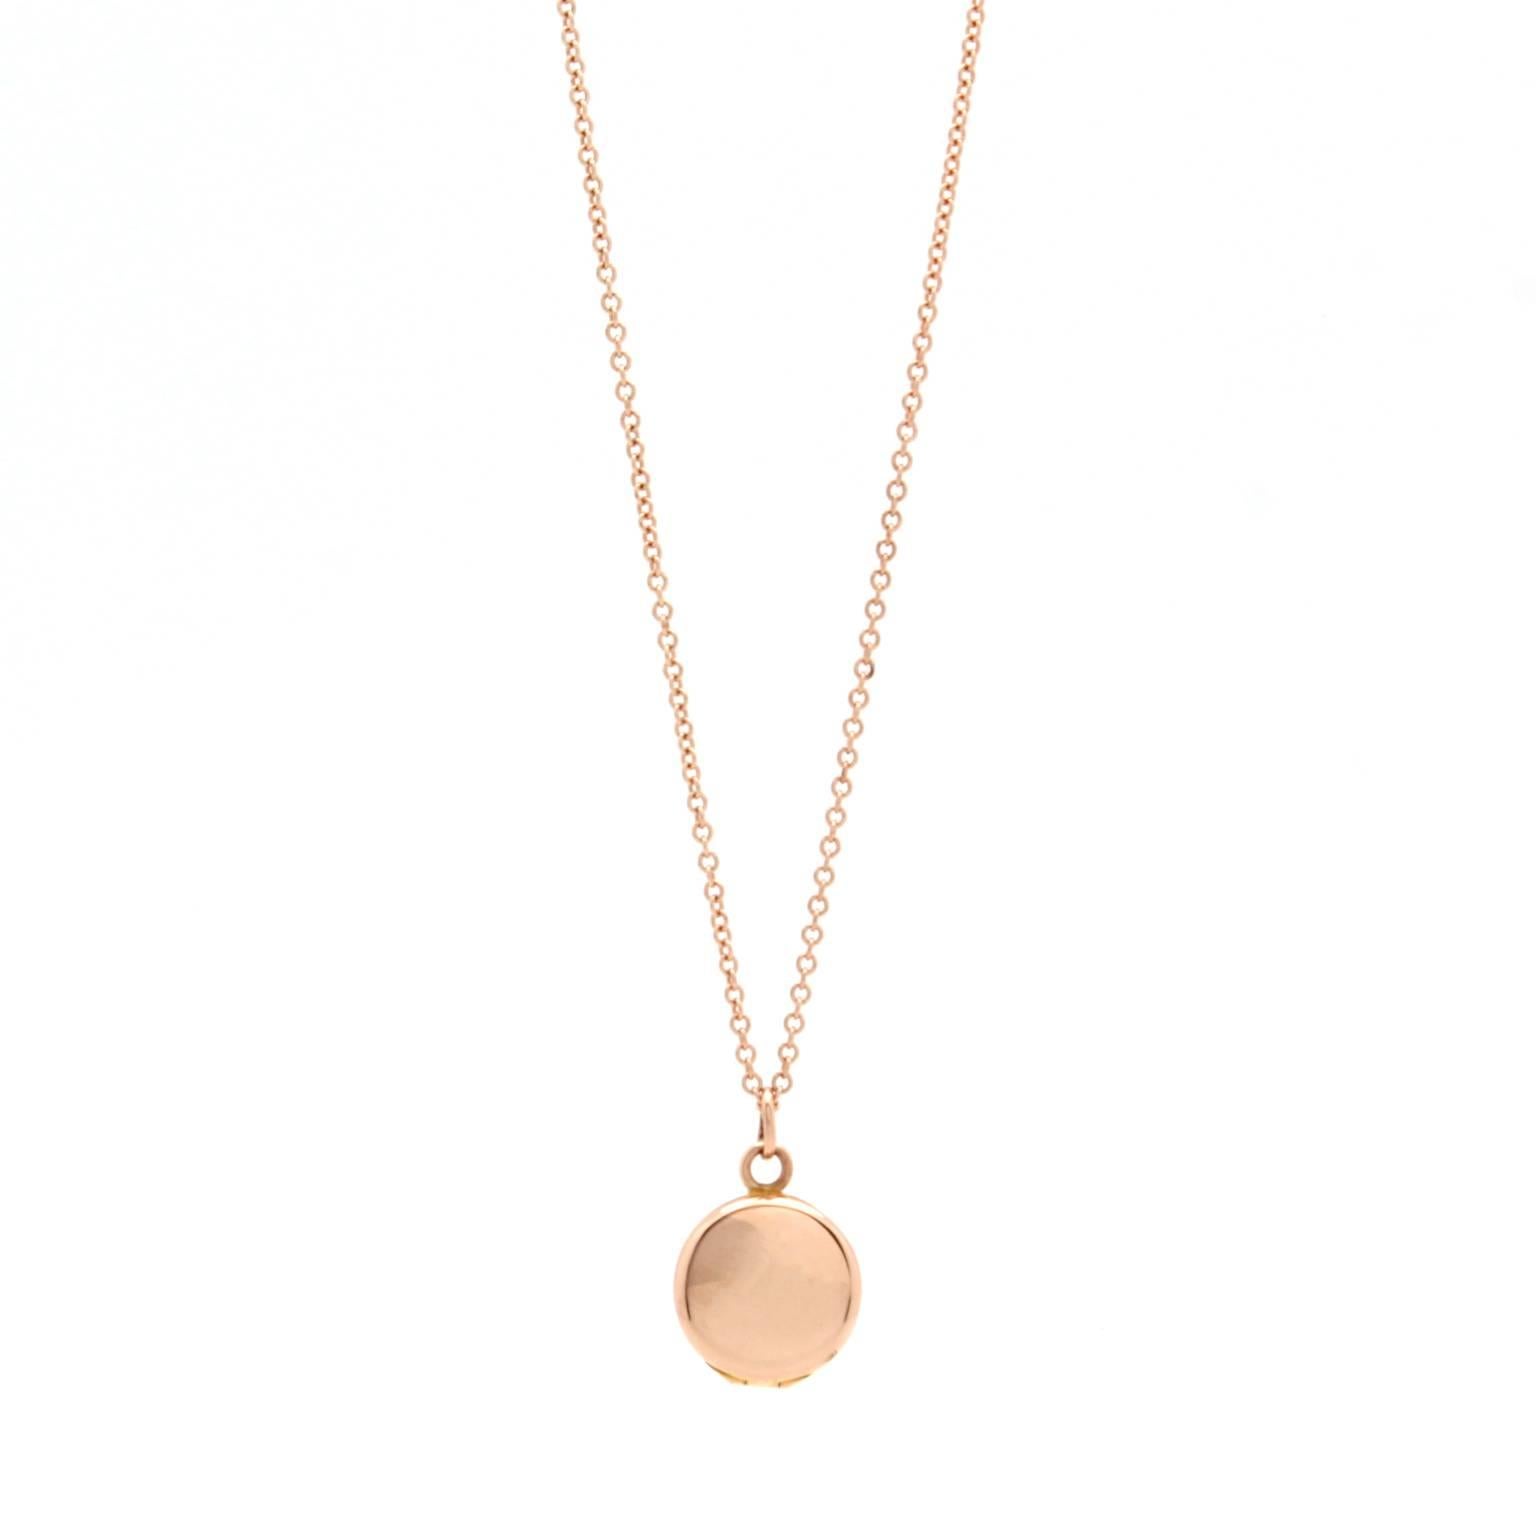 This vintage locket features hand engraving on its front and a polished smooth metal back. It is made of 14k rose gold and hangs from a new 14k rose gold 16″ chain. The locket measures 9mm in diameter.

